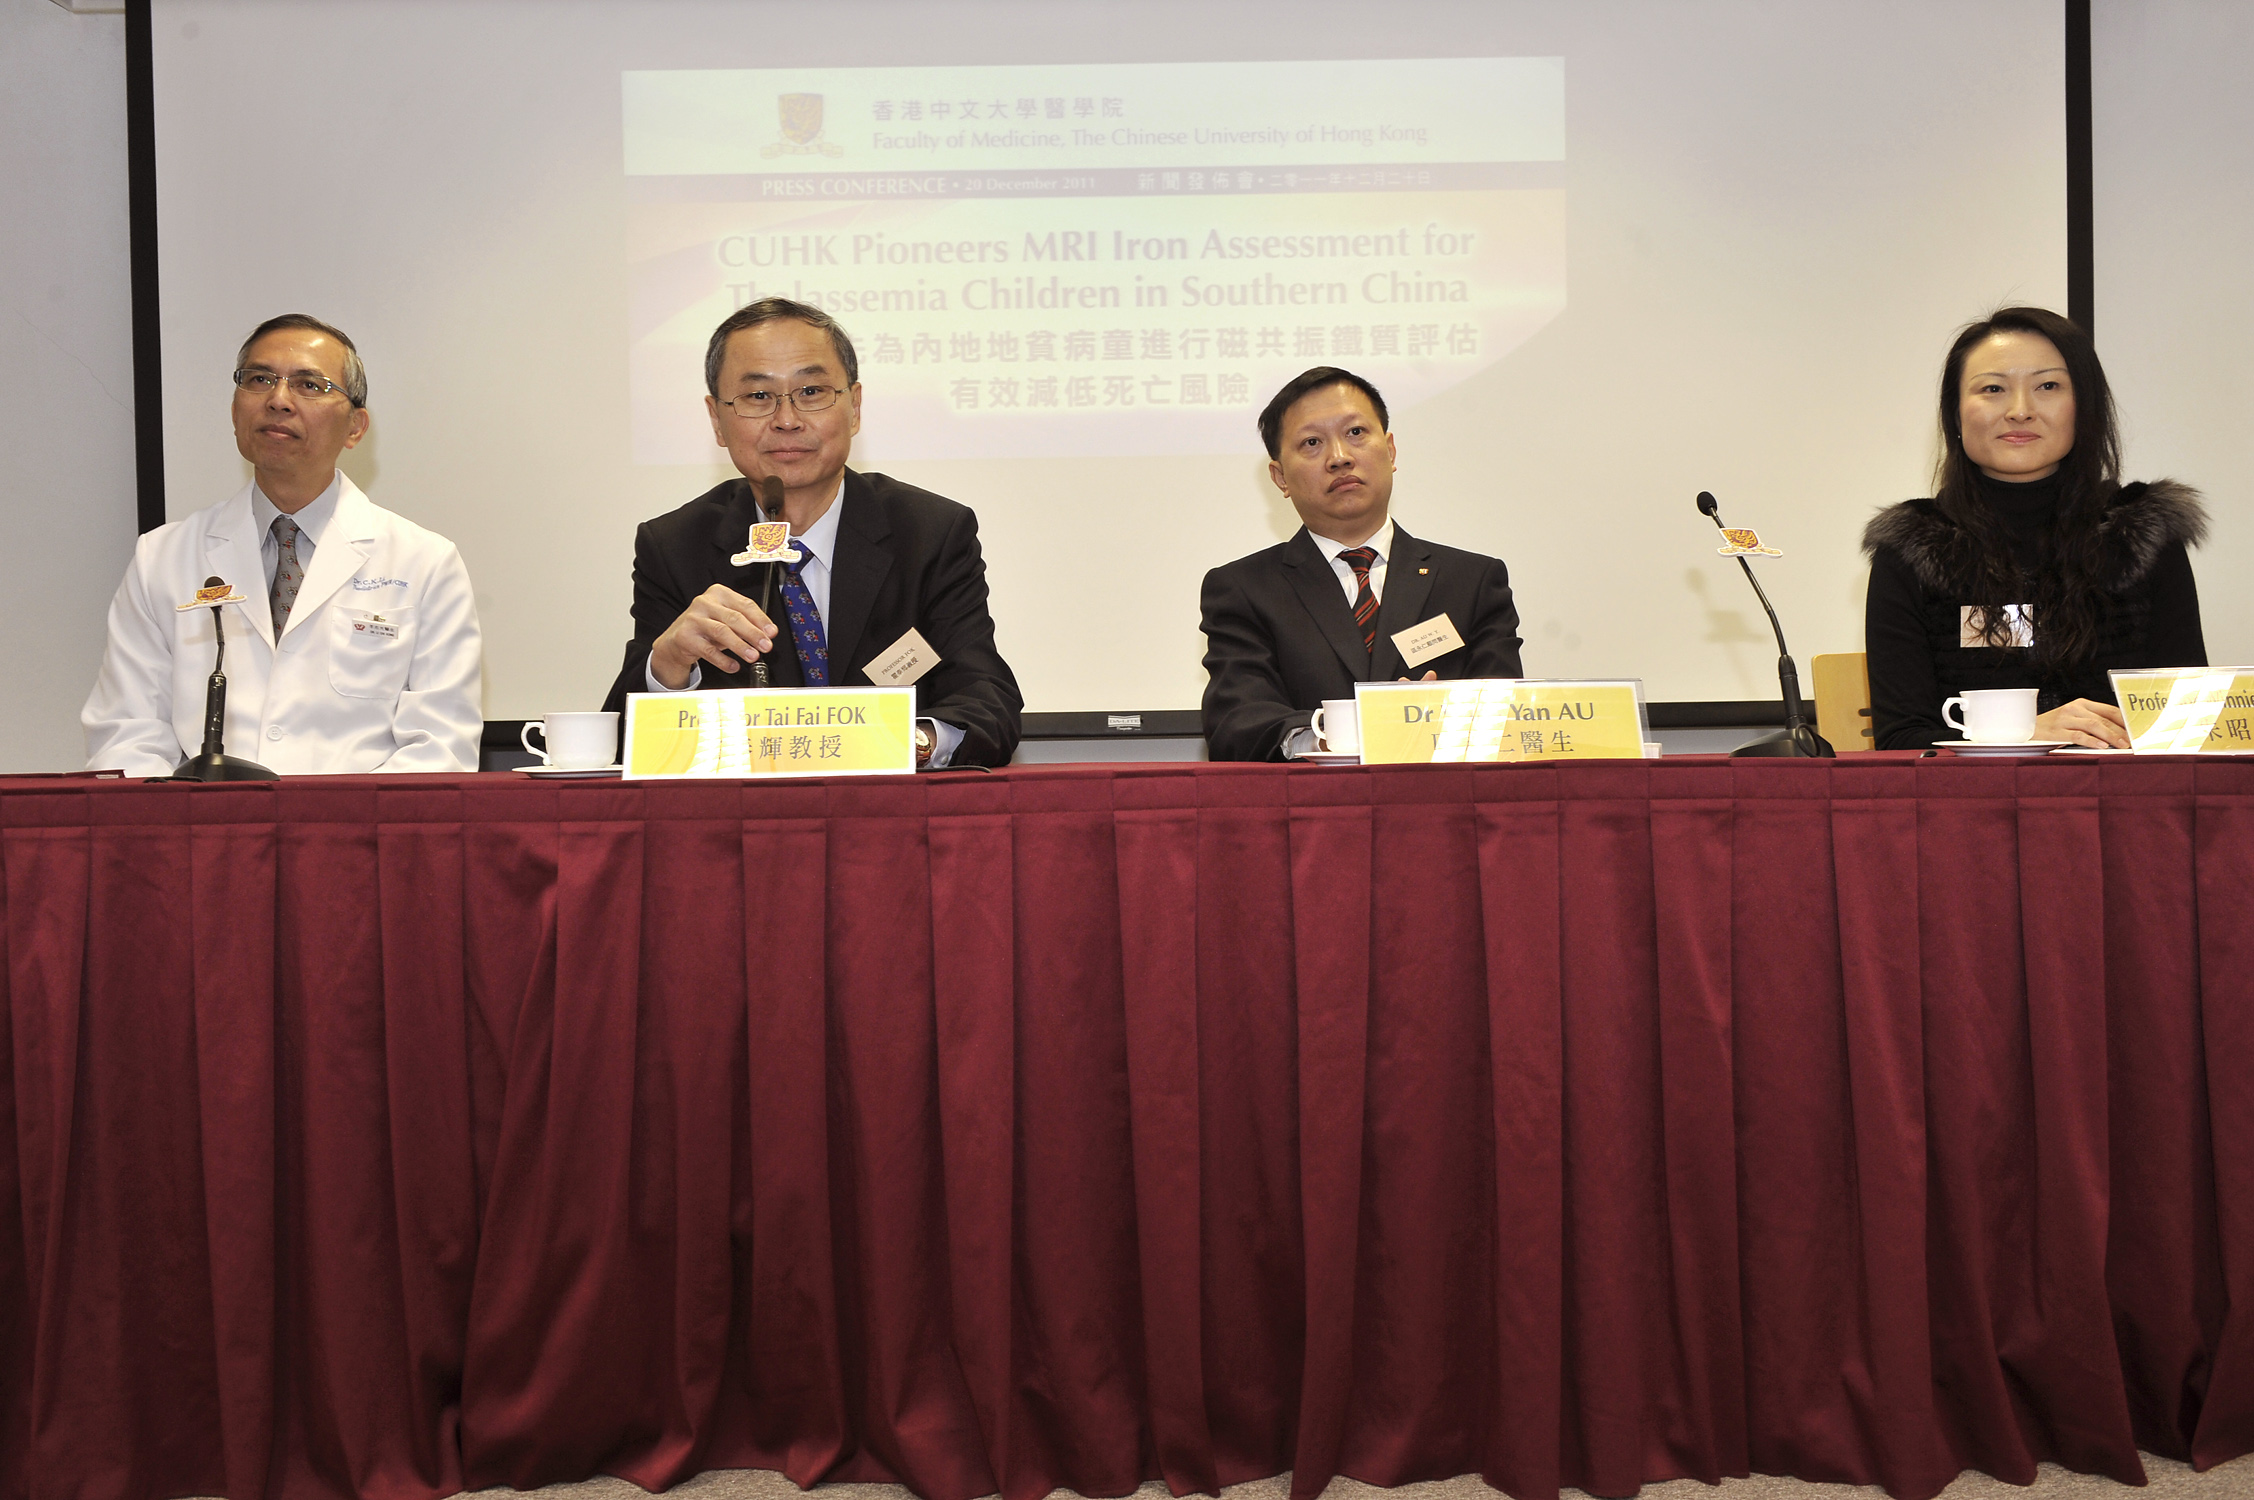 (from left) Dr. Chi Kong LI, Chief of Service, Department of Paediatrics, Prince of Wales Hospital; Professor Tai Fai FOK, Dean, Faculty of Medicine, CUHK; Dr. Wing Yan AU, Hematology Specialist and Professor Winnie Chiu Wing CHU, Professor, Department of Imaging and Interventional Radiology, Faculty of Medicine, CUHK